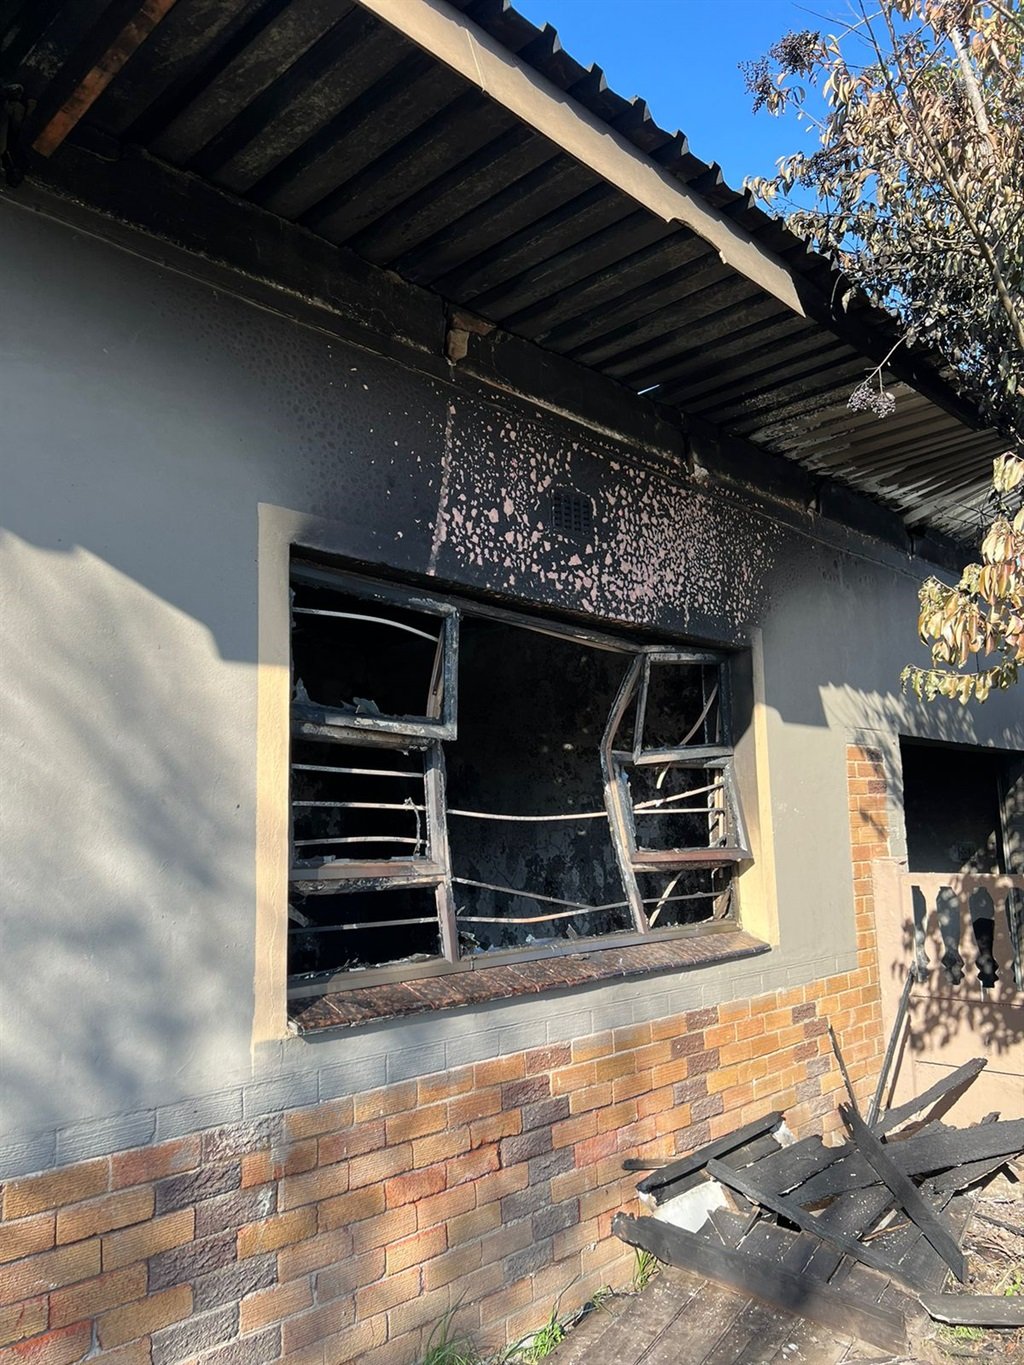 The damage that was caused by fire is suspected to